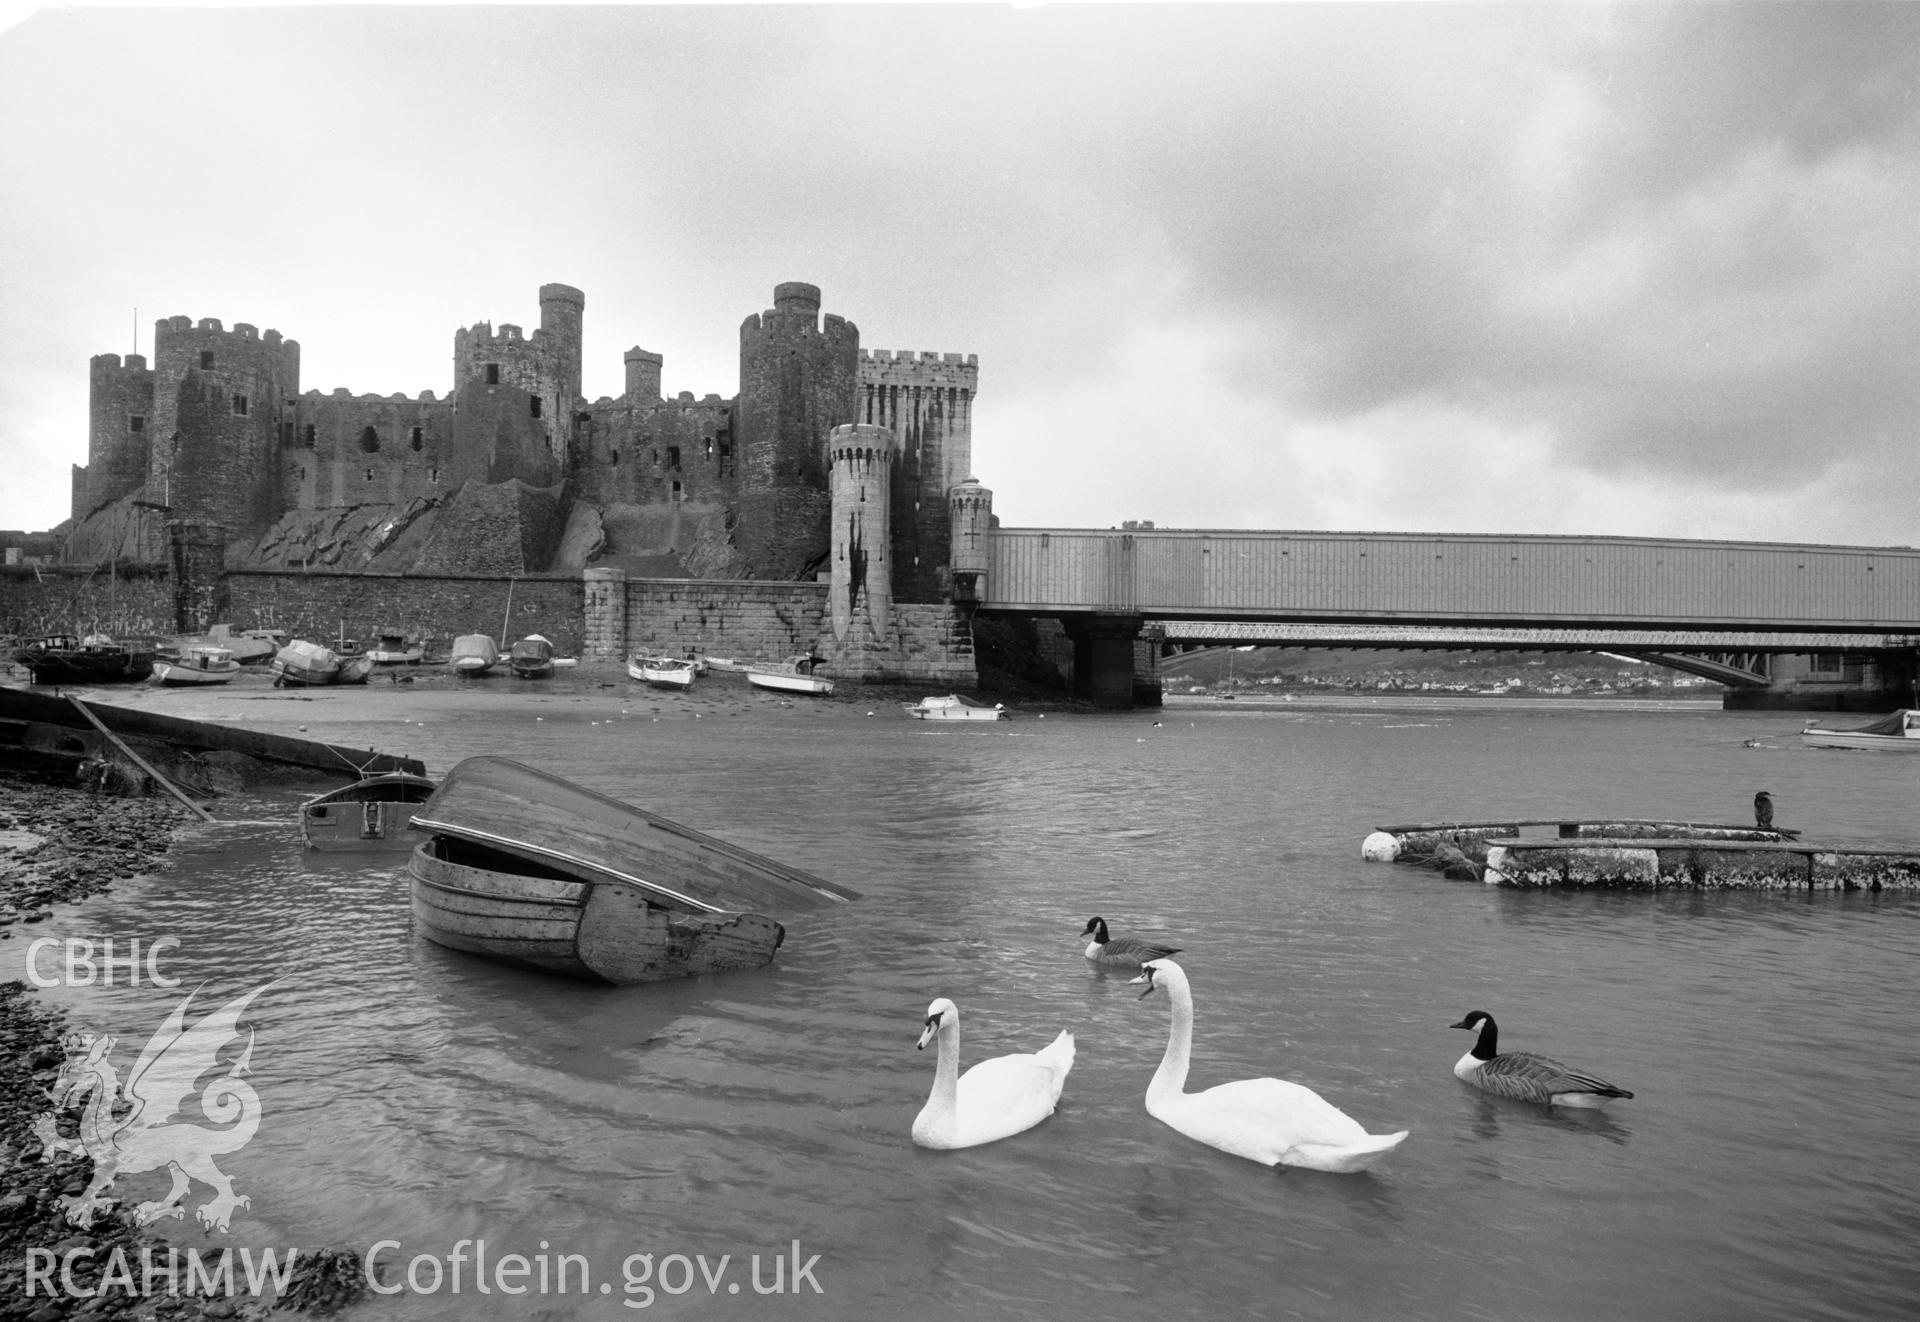 Photographic negative showing view of Conwy castle with swans; collated by the former Central Office of Information.